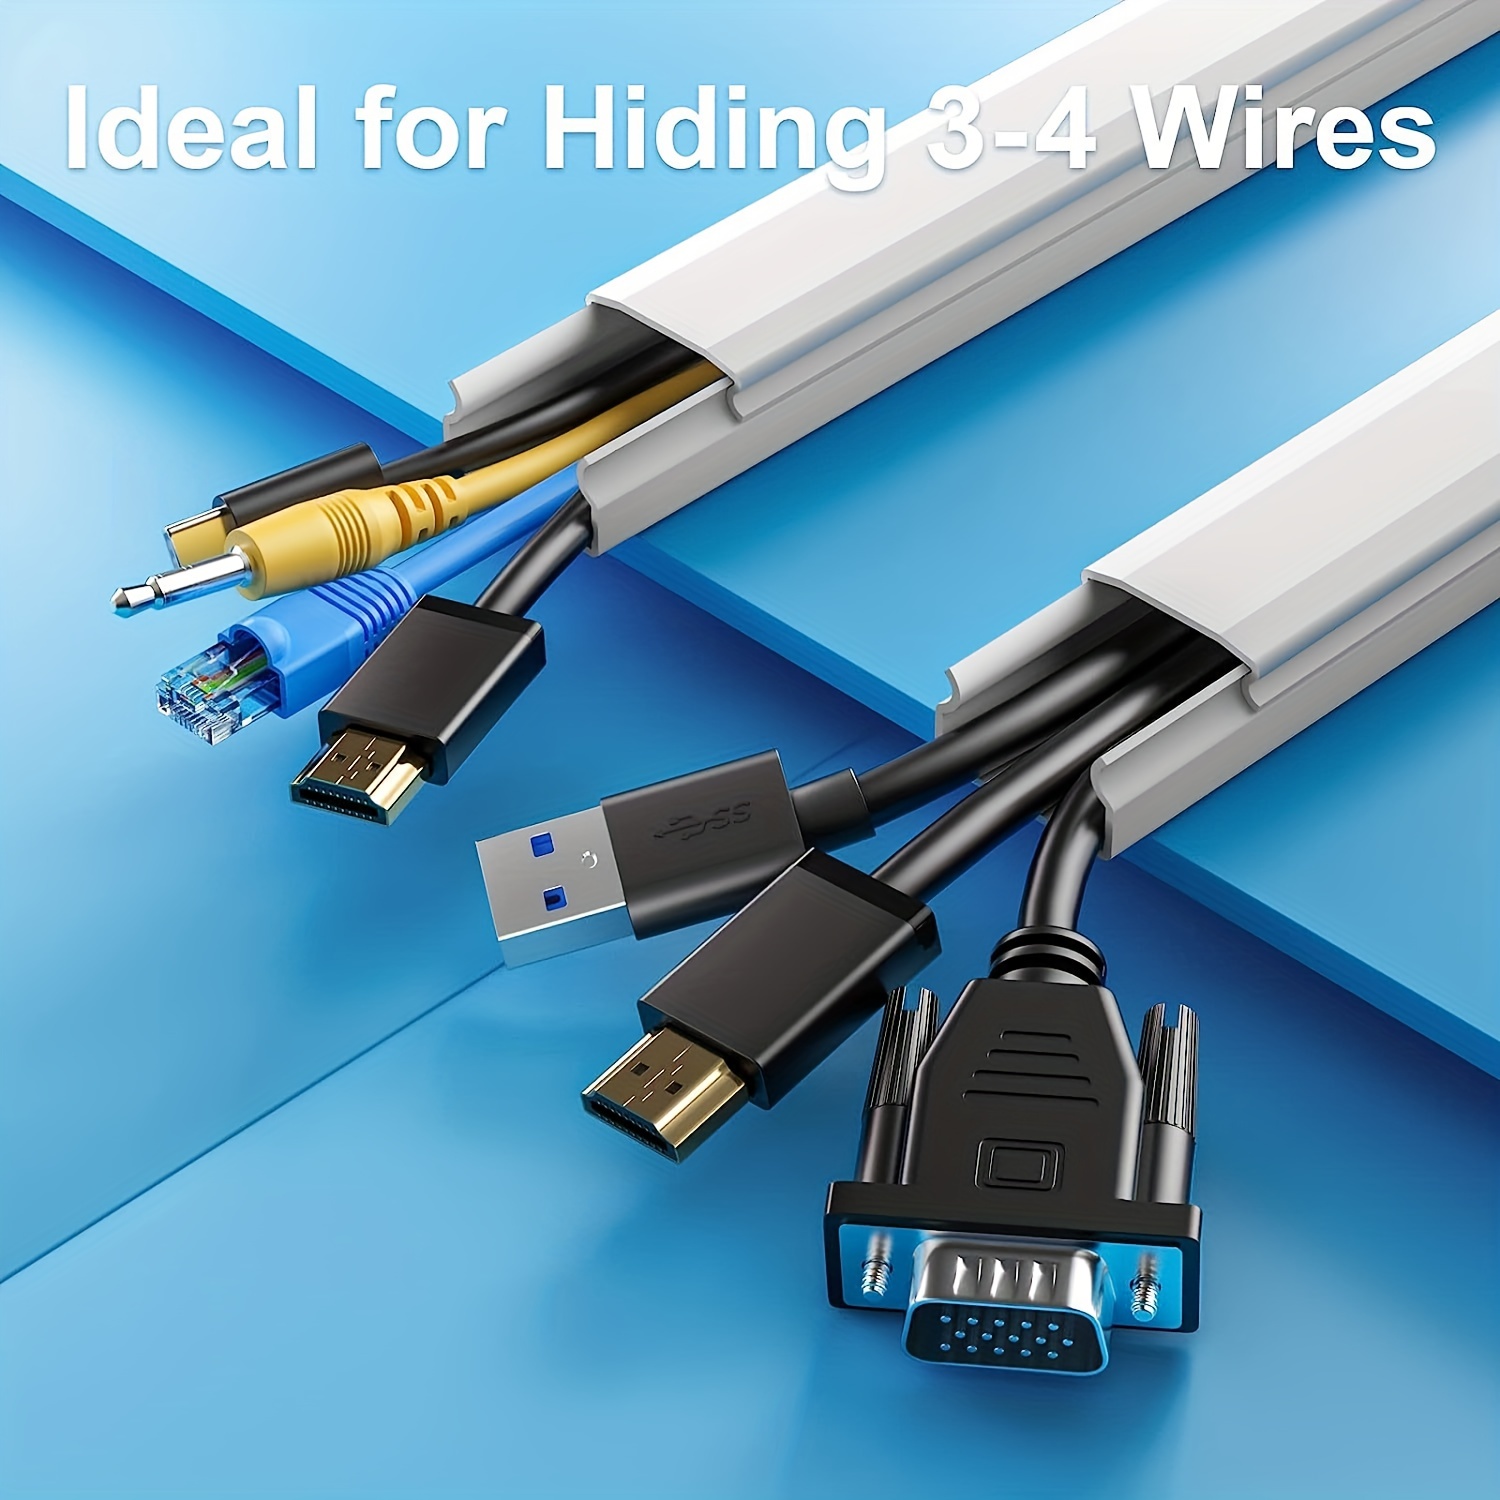 RISE-Cable Concealer, Cord Cover Hider, Cable Cord Management